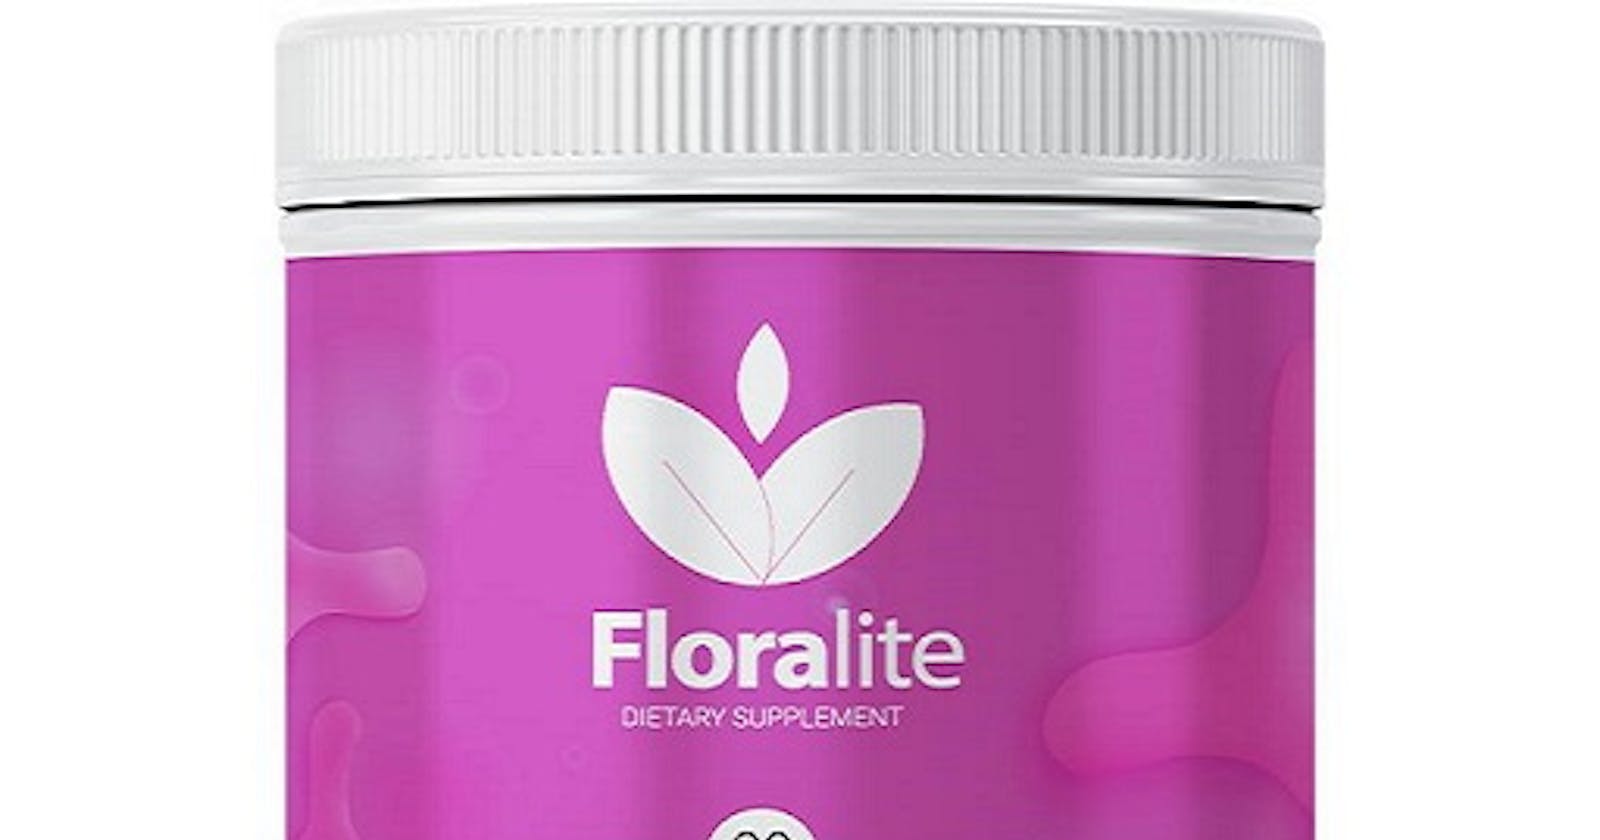 Floralite Reviews Wight Loss Supplements Does really work?